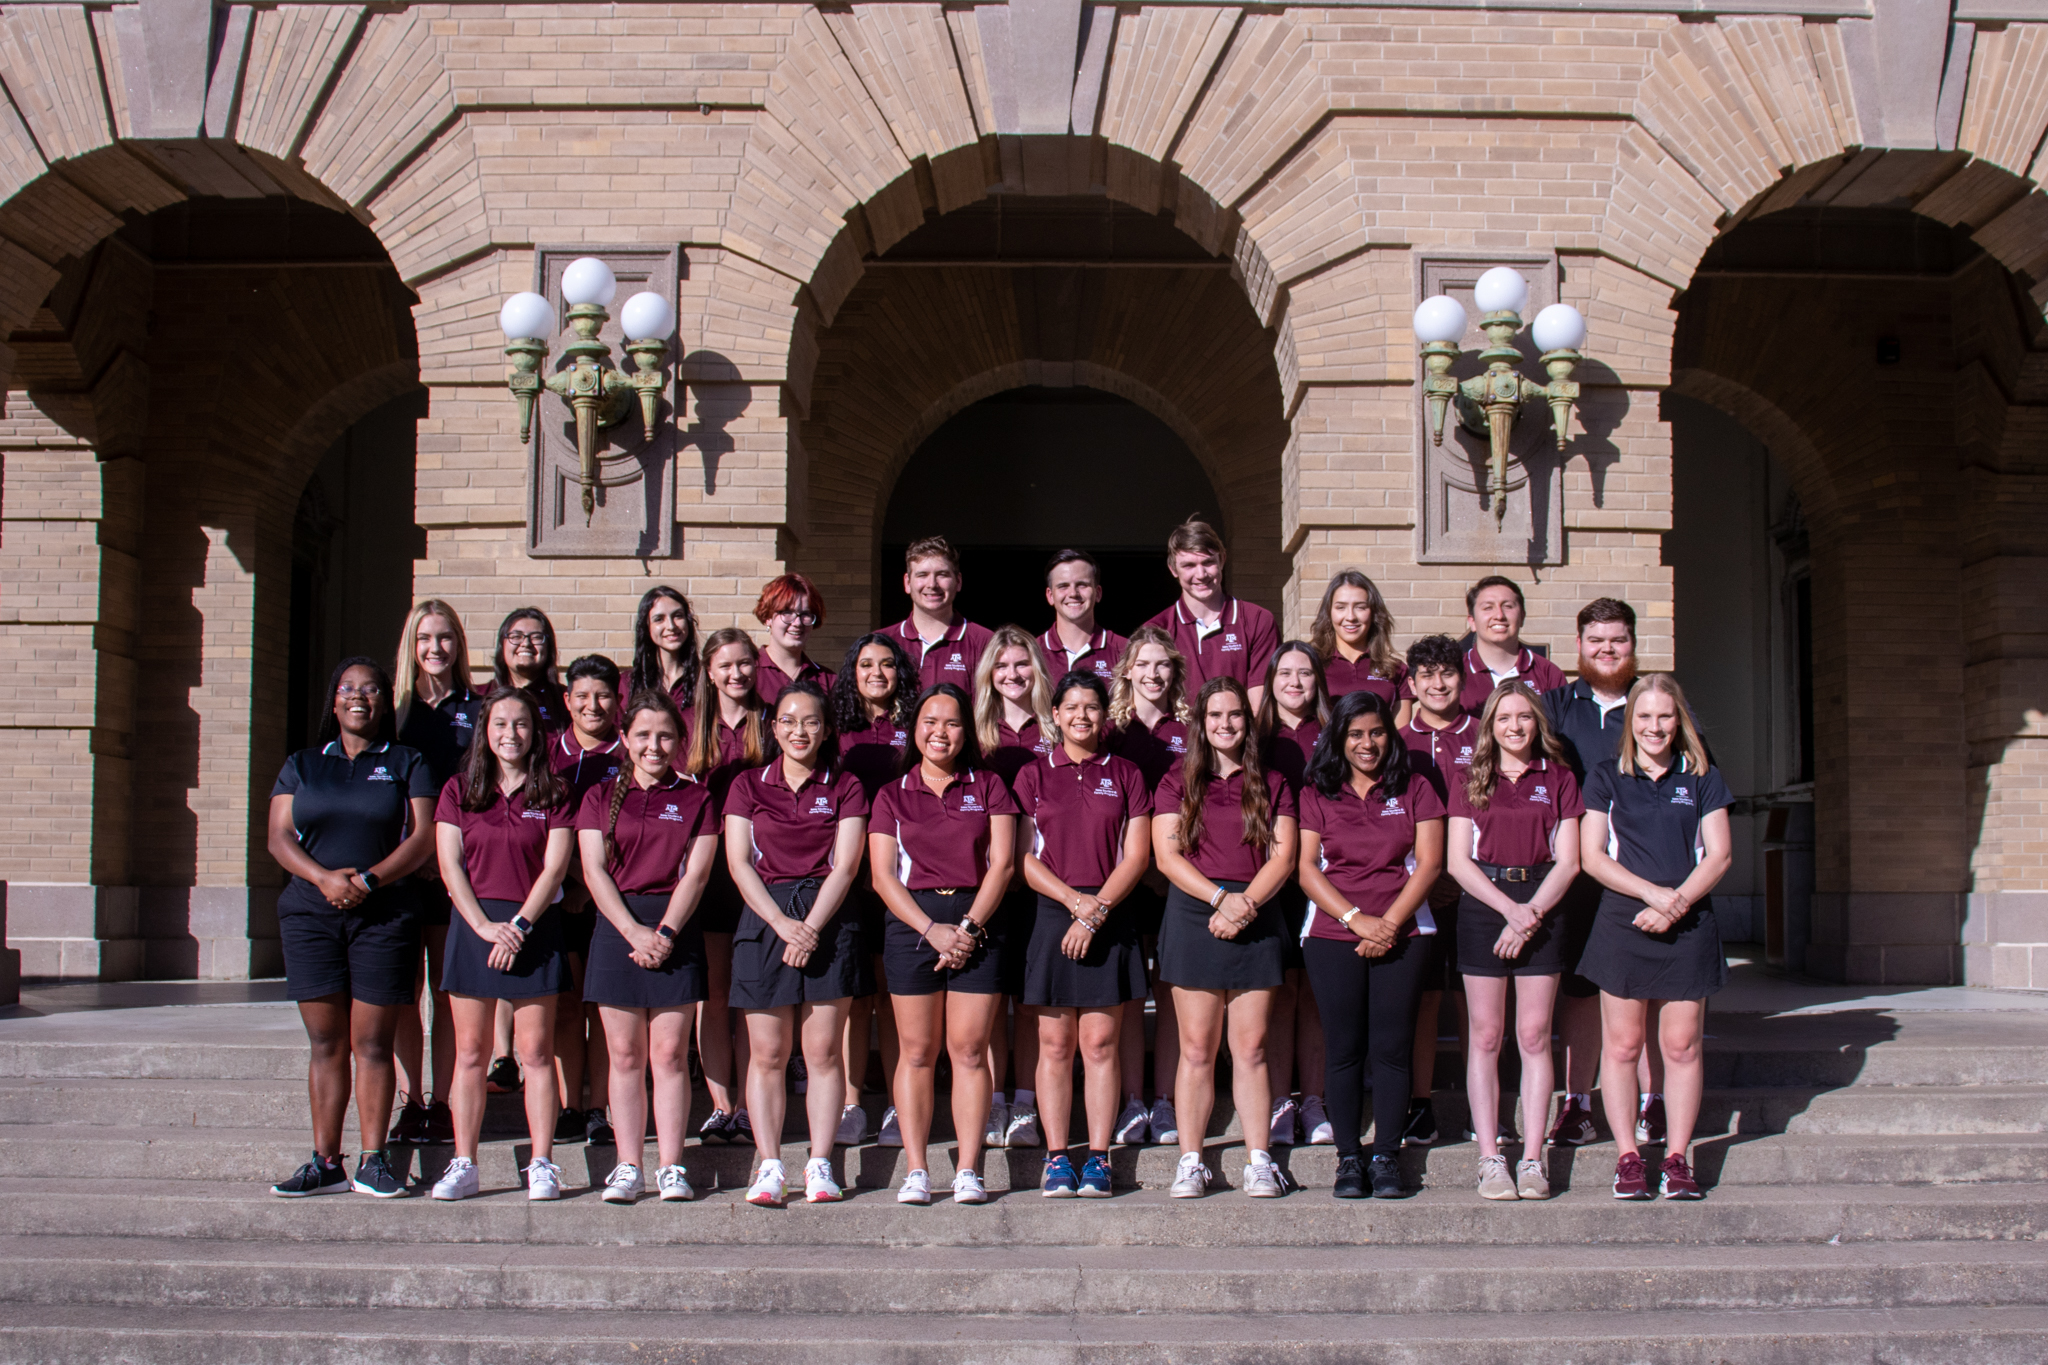 Group photo of the Aggie Orientation Leaders in their uniforms standing on the steps of the Academic Building on a sunny day.